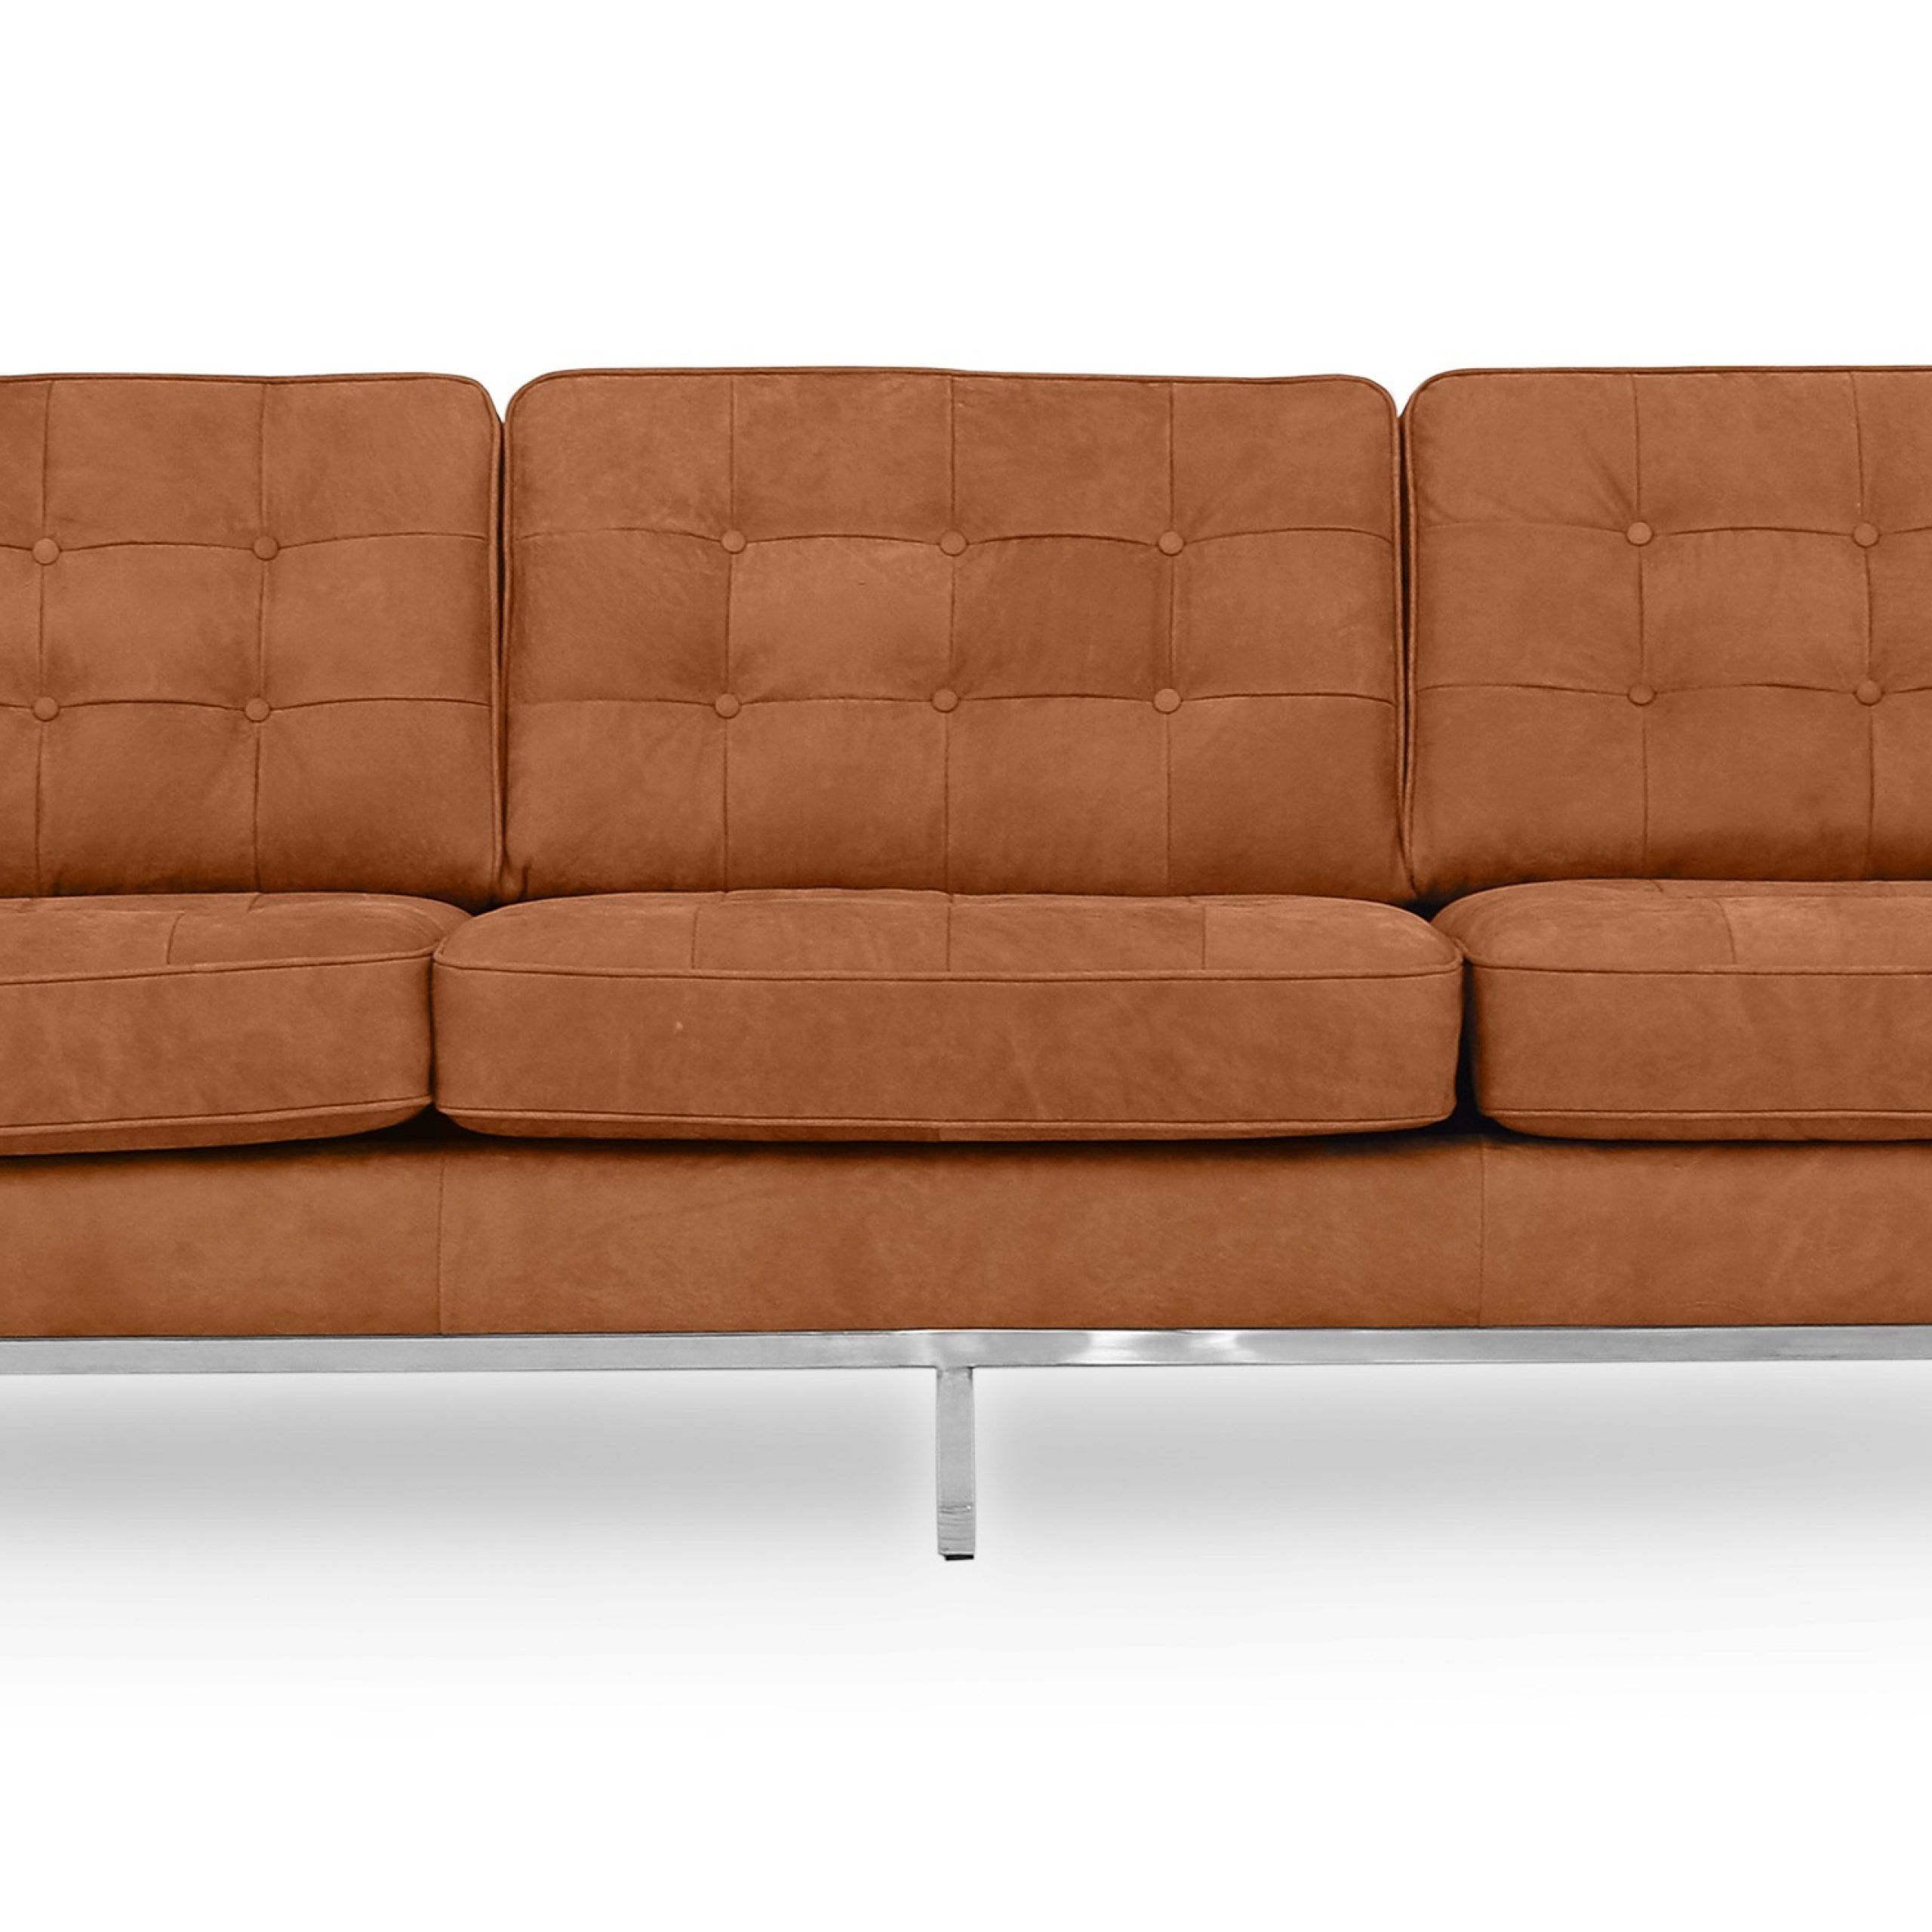 Kardiel Florence Mid Century Modern 89" Sofa, Cognac Full With Regard To Florence Mid Century Modern Right Sectional Sofas (View 1 of 15)